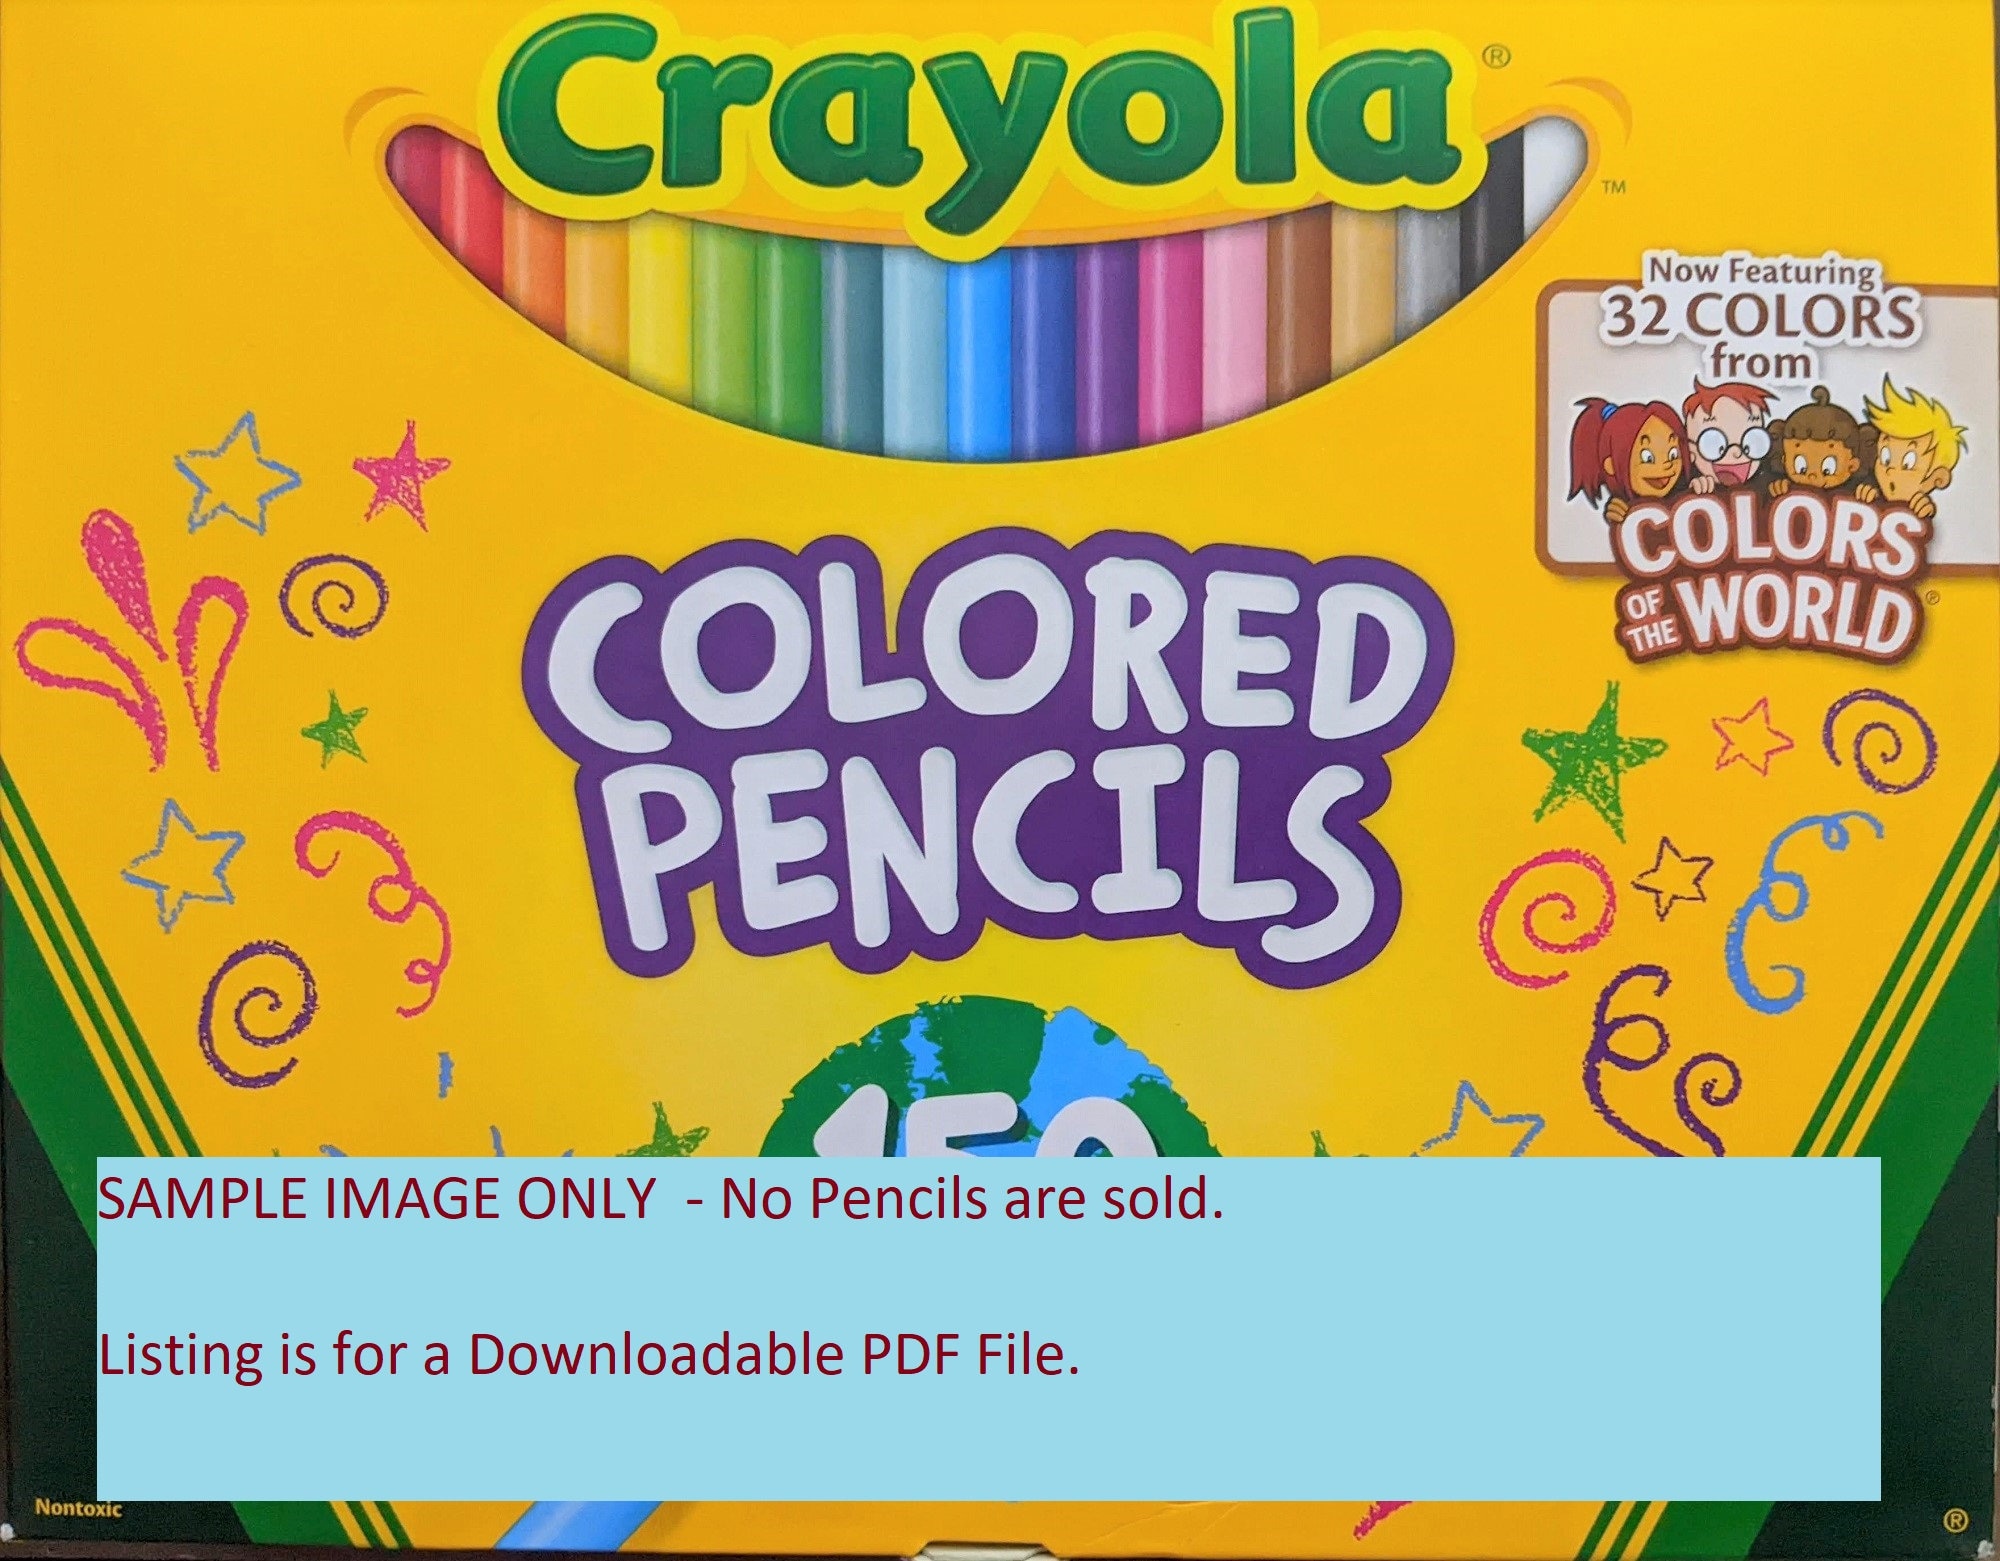 Crayola Colored Pencil Set, Colors of the World, 150 Ct, Back to